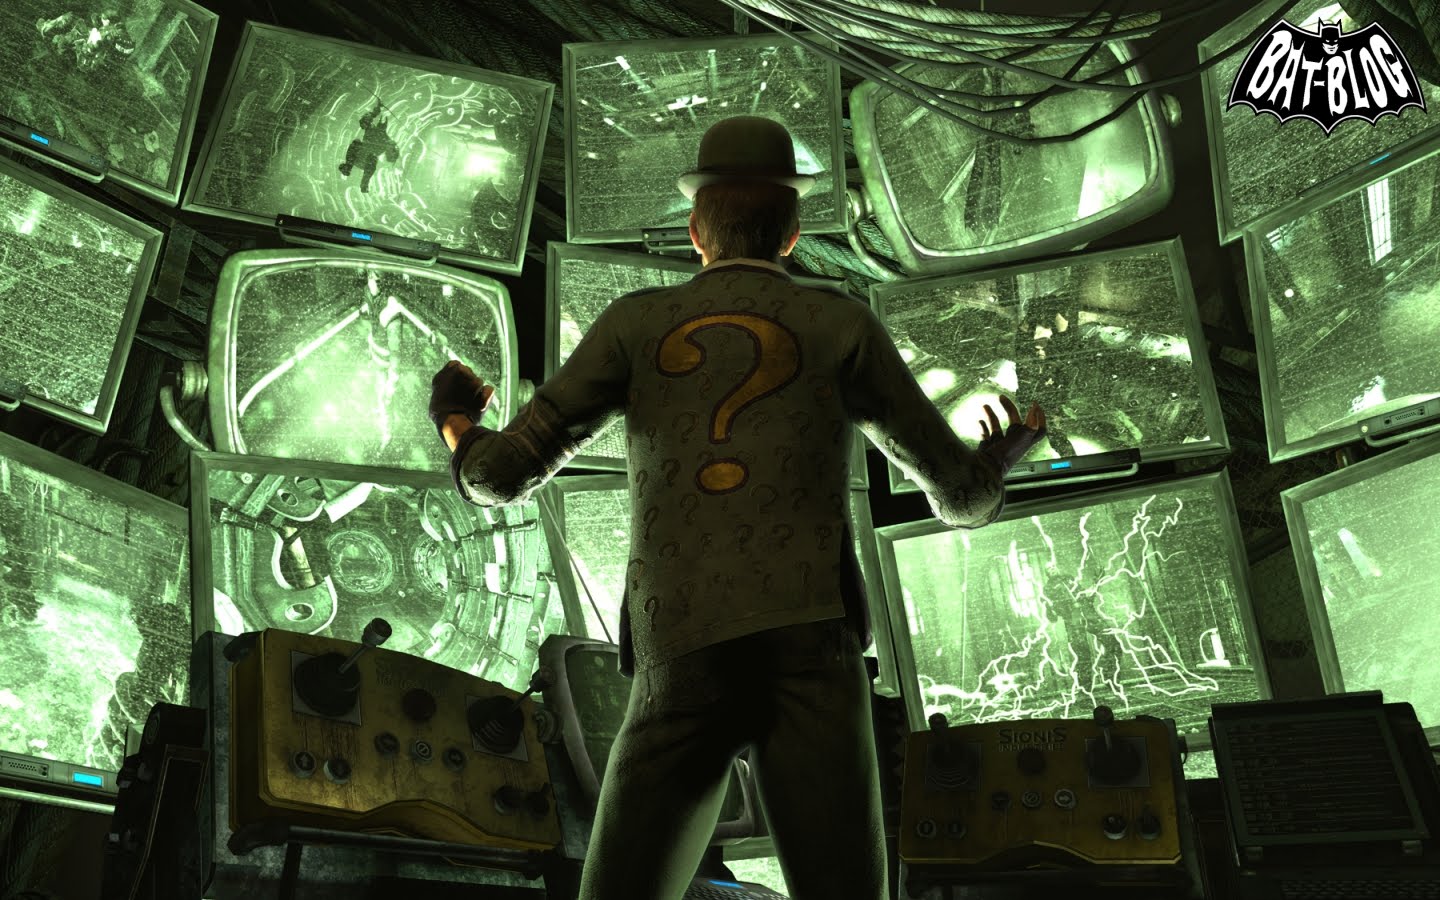 Your Number 1 Toys Collection Source: THE RIDDLER Wallpaper Background From BATMAN ARKHAM CITY Video Game